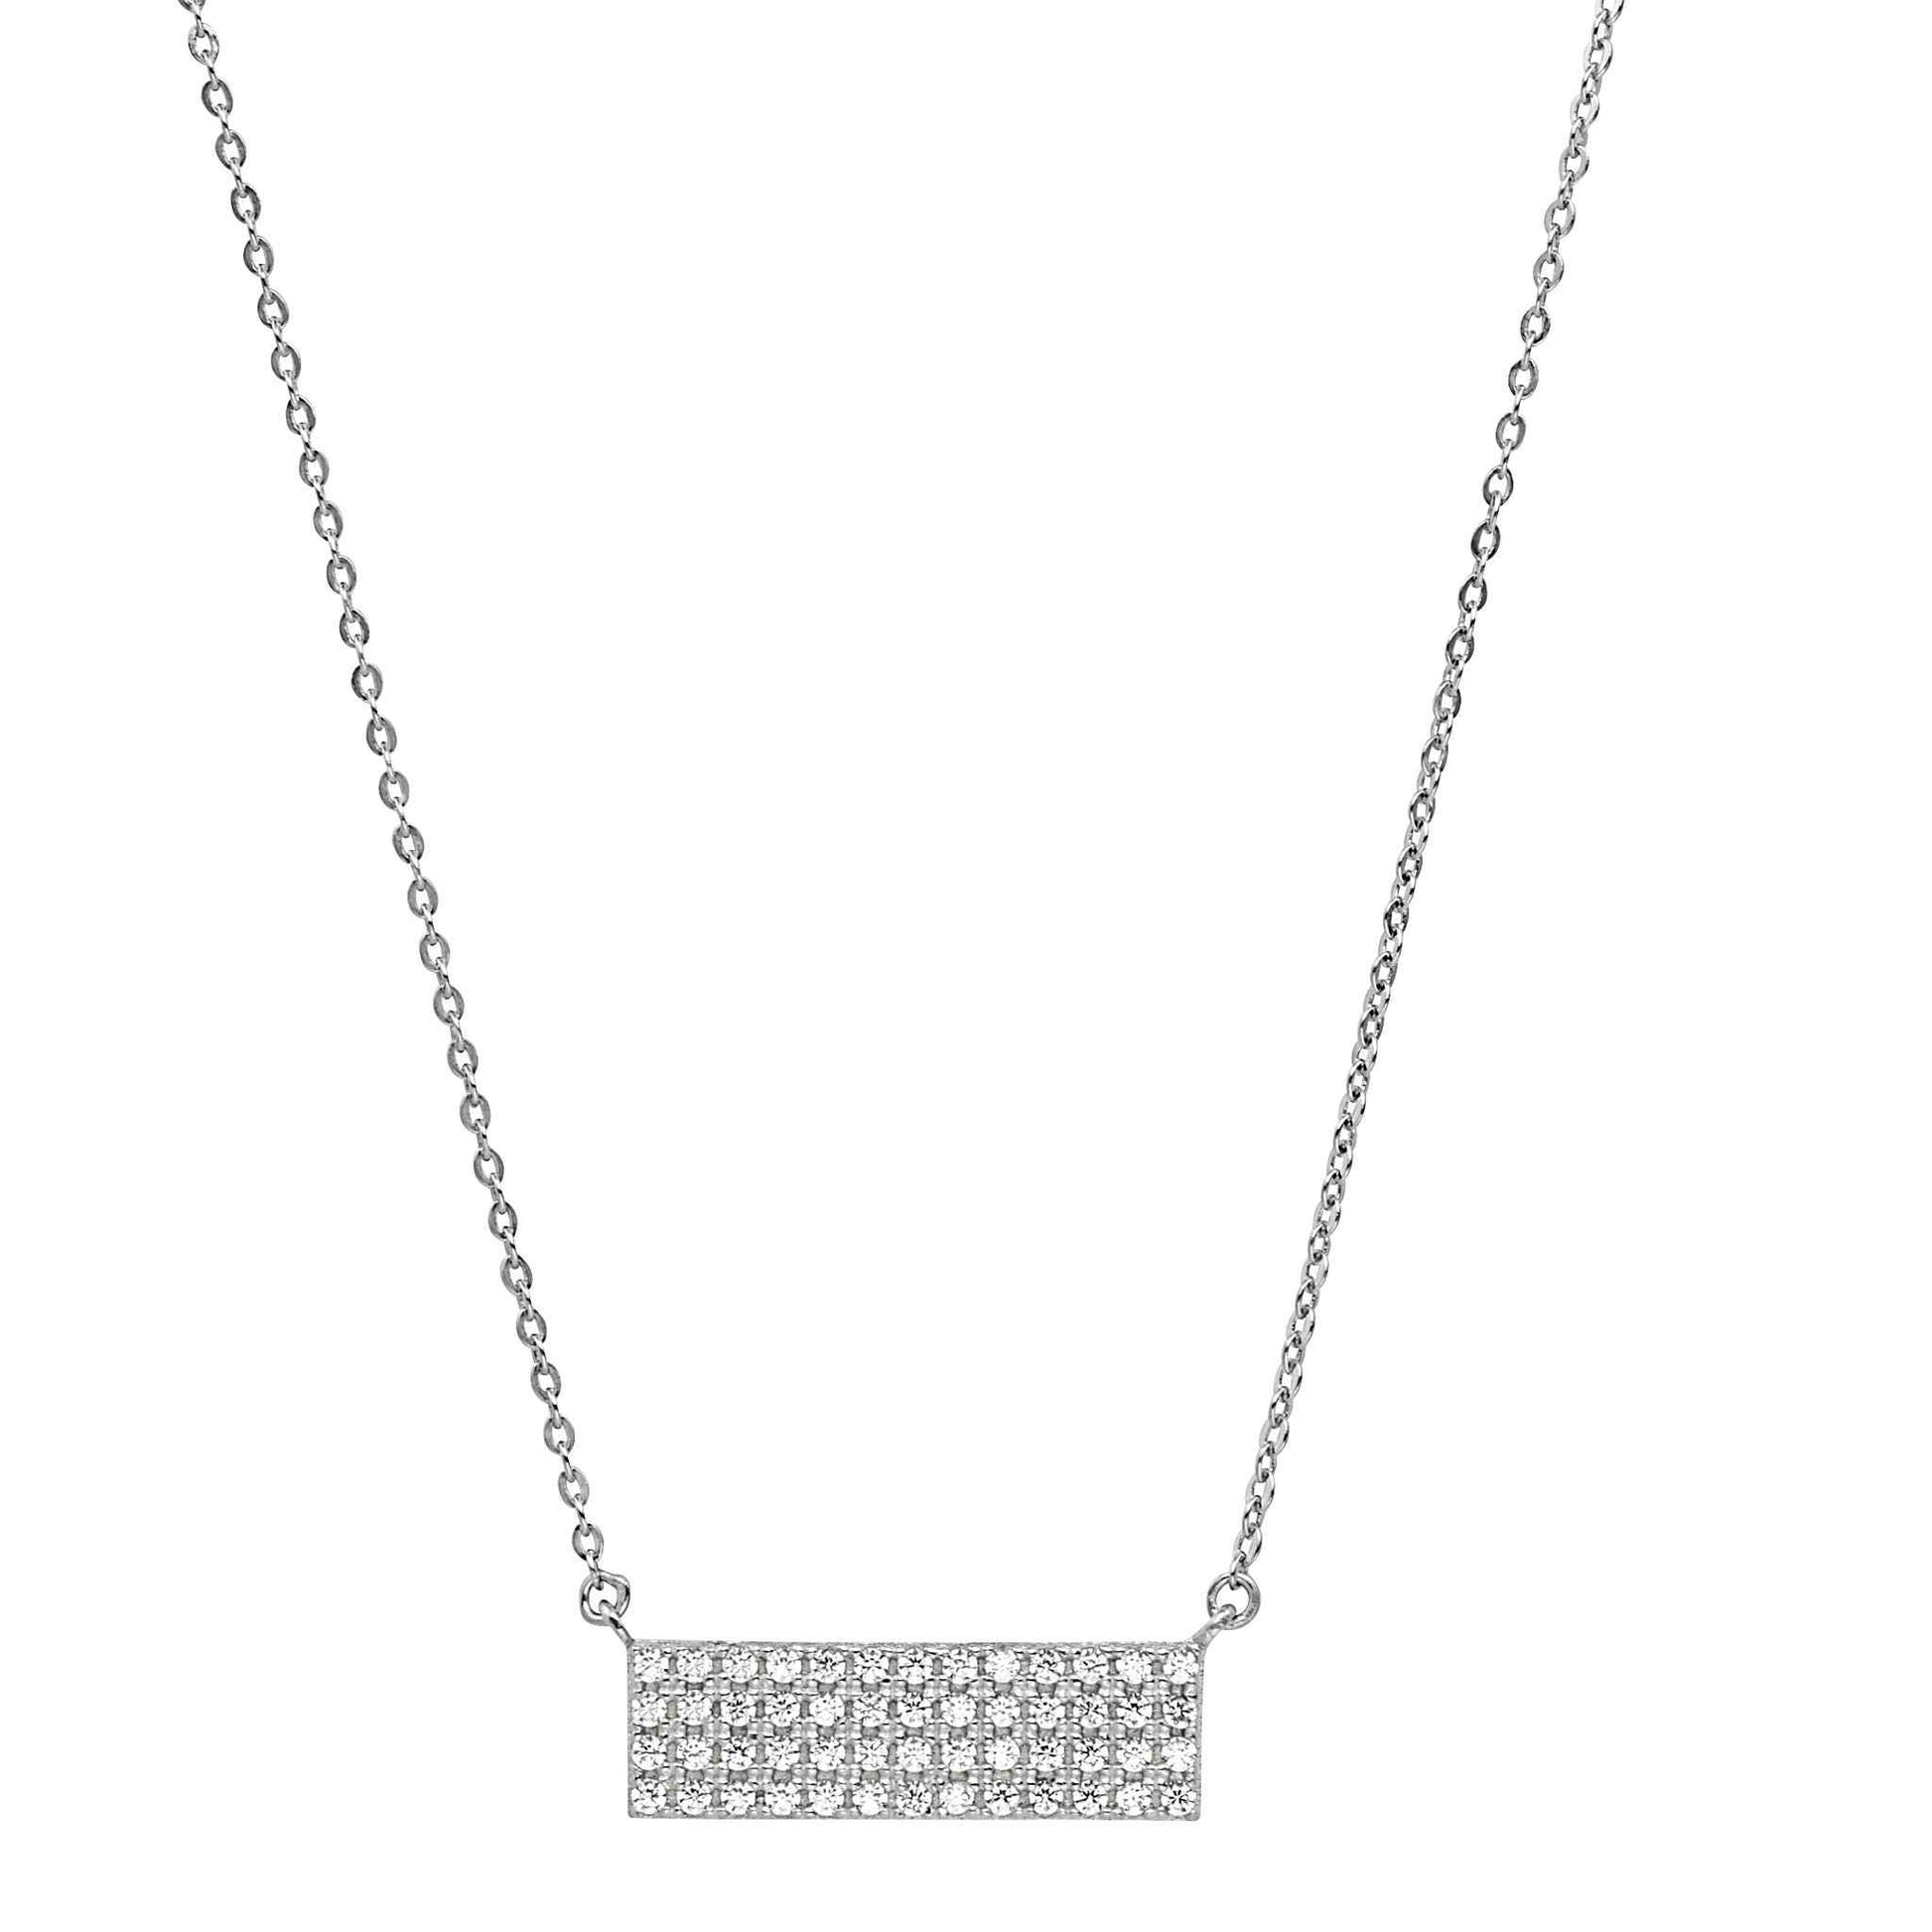 A four row bar necklace with simulated diamonds displayed on a neutral white background.